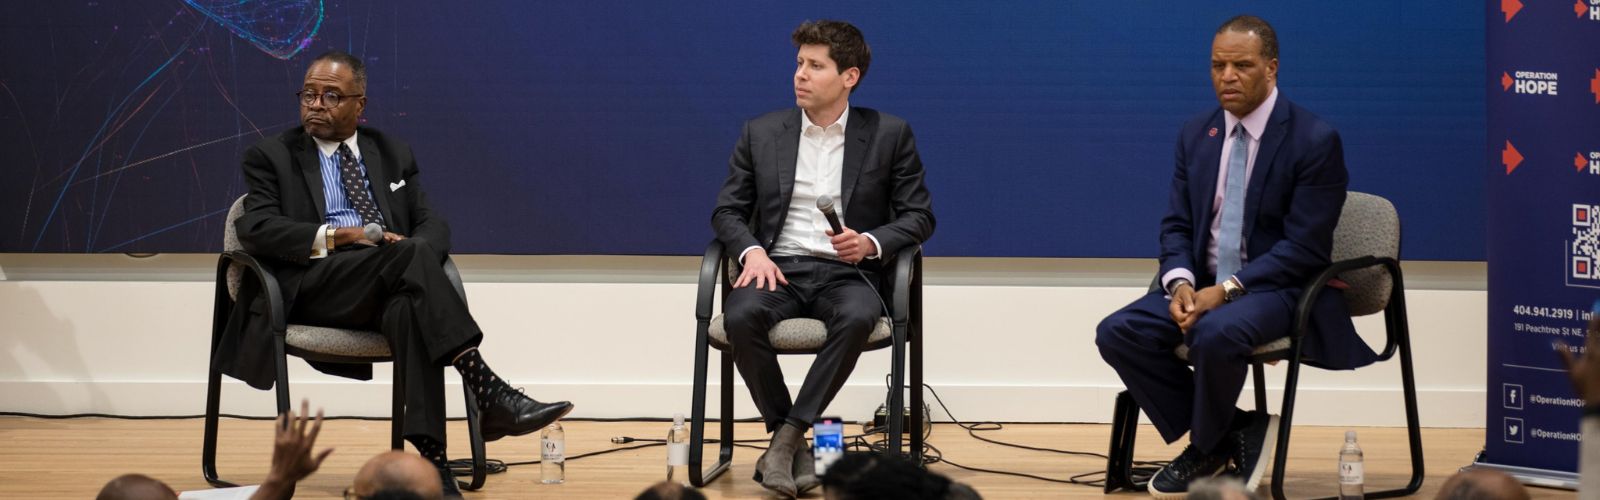 “One Man’s Poison is Another Man’s Meat” – A closer look at Sam Altman